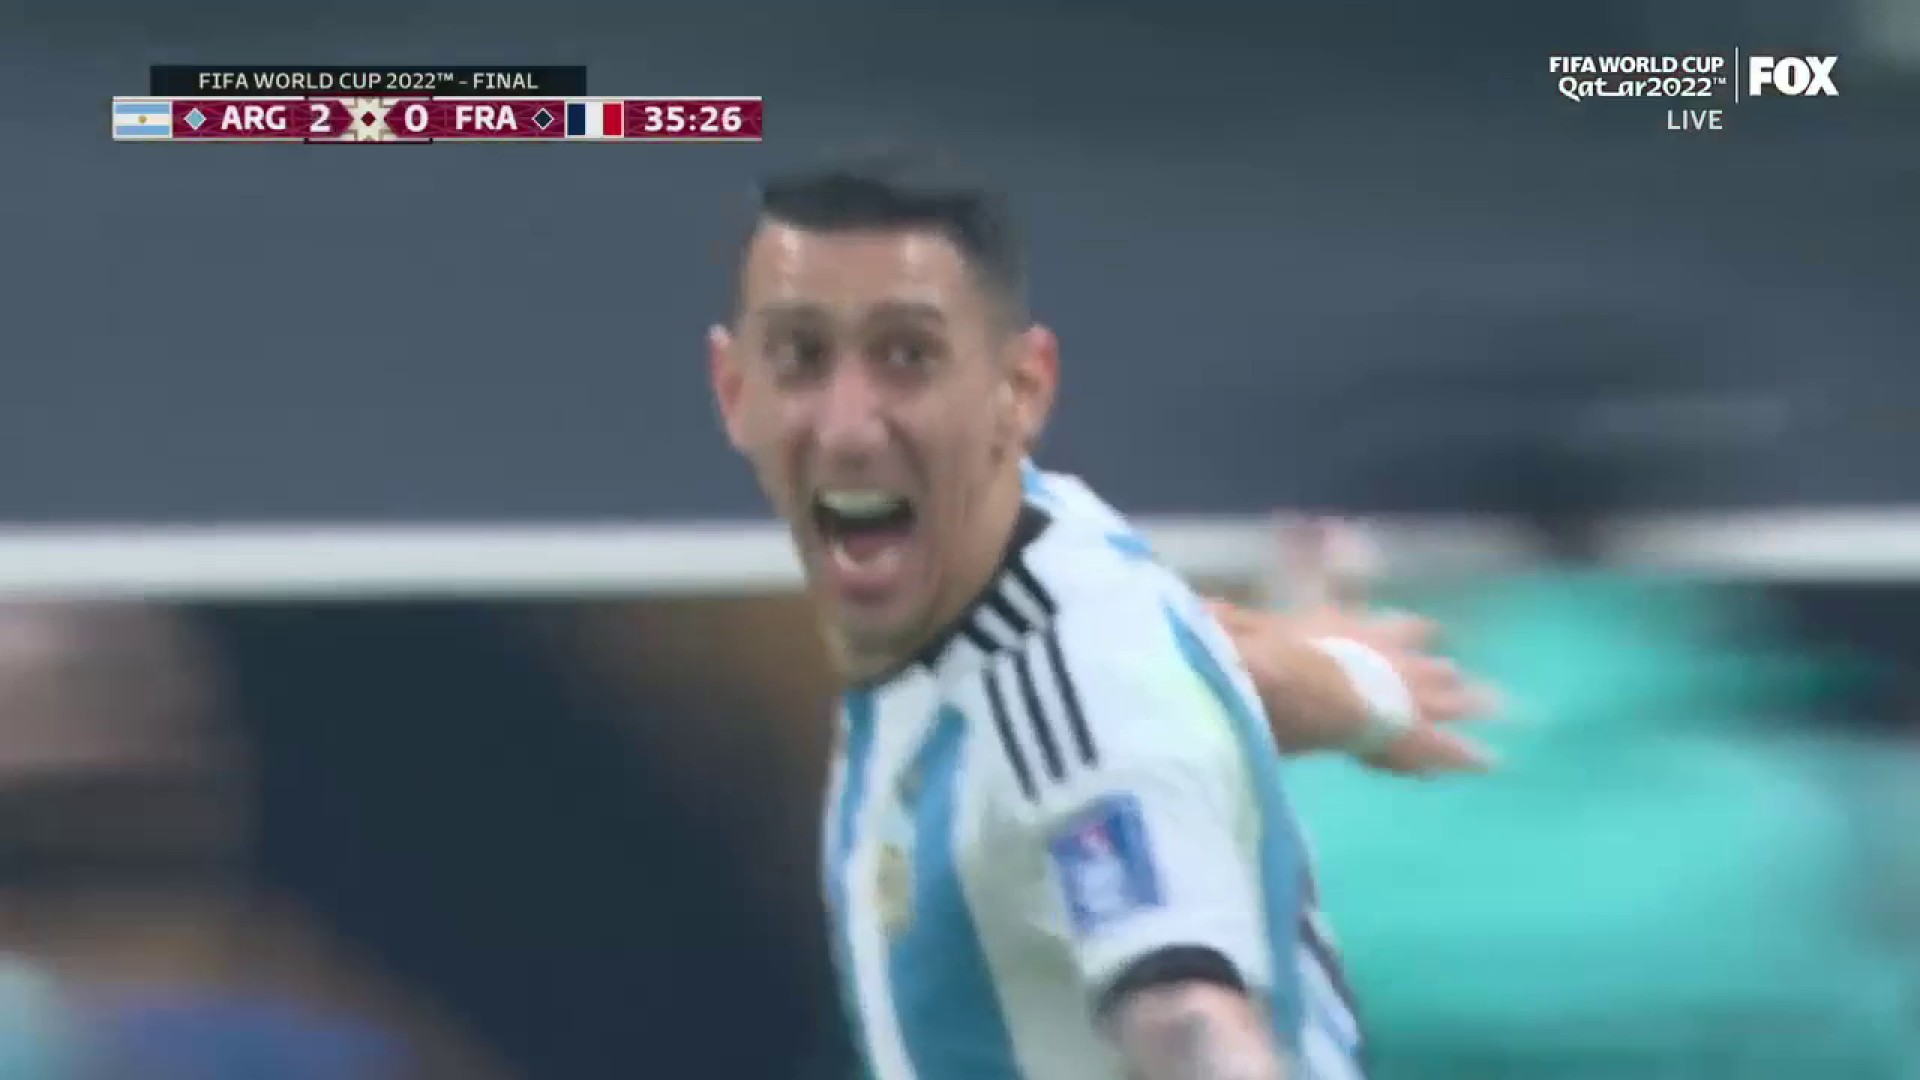 OH MY WHAT A GOAL 😱

2-0 ARGENTINA 🇦🇷”